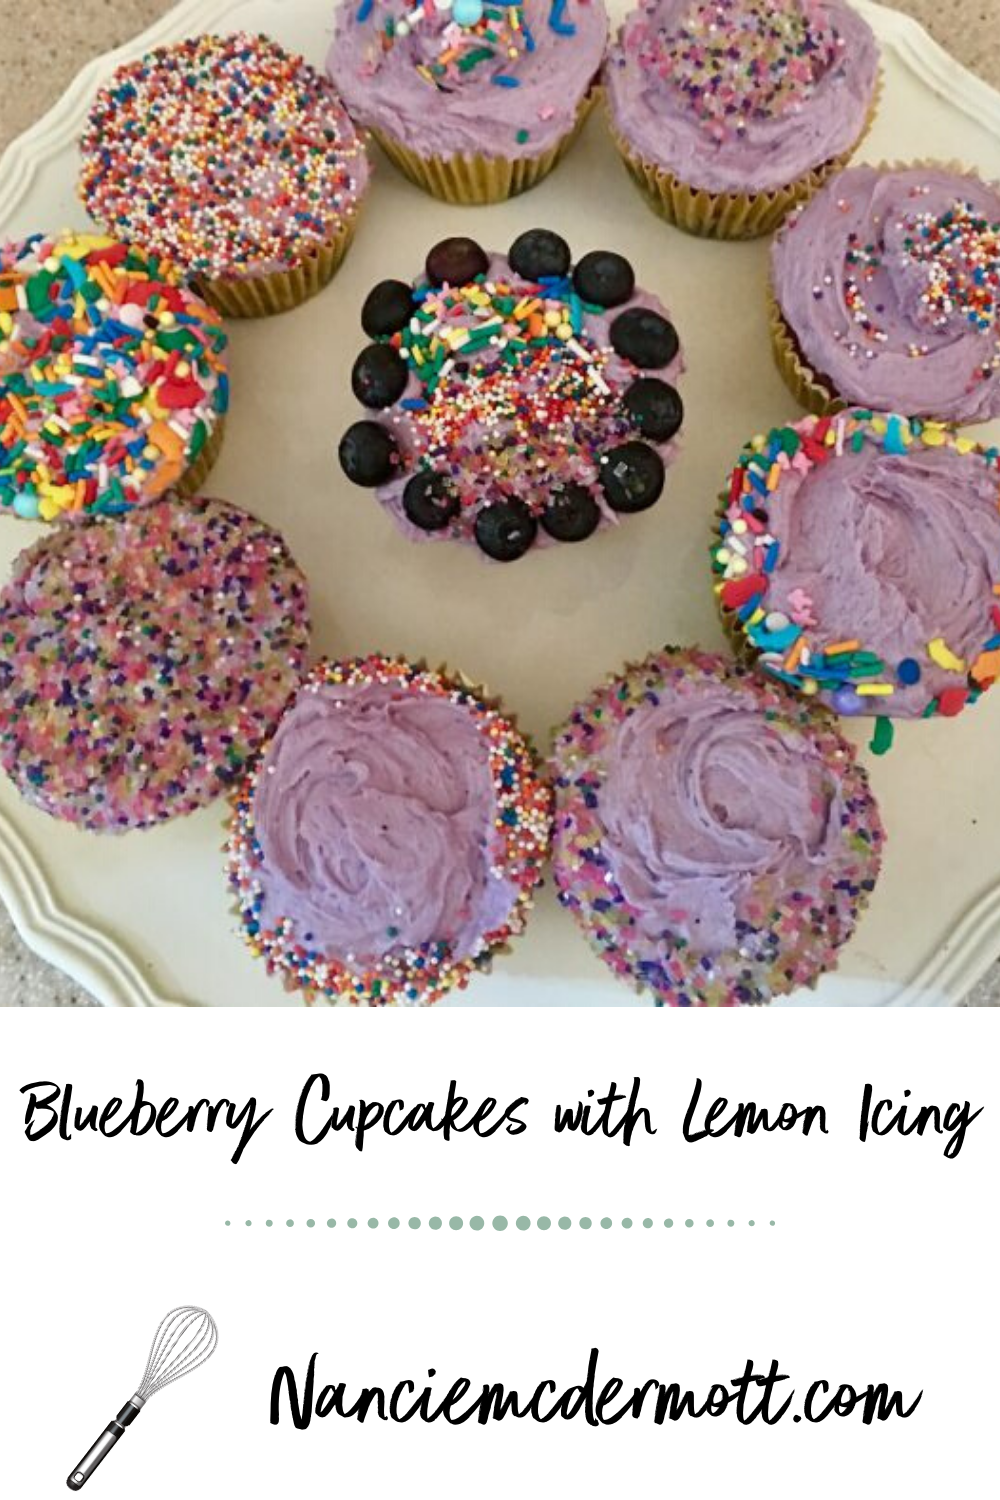 Pin Image Blueberry Cupcakes with Lemon Icing